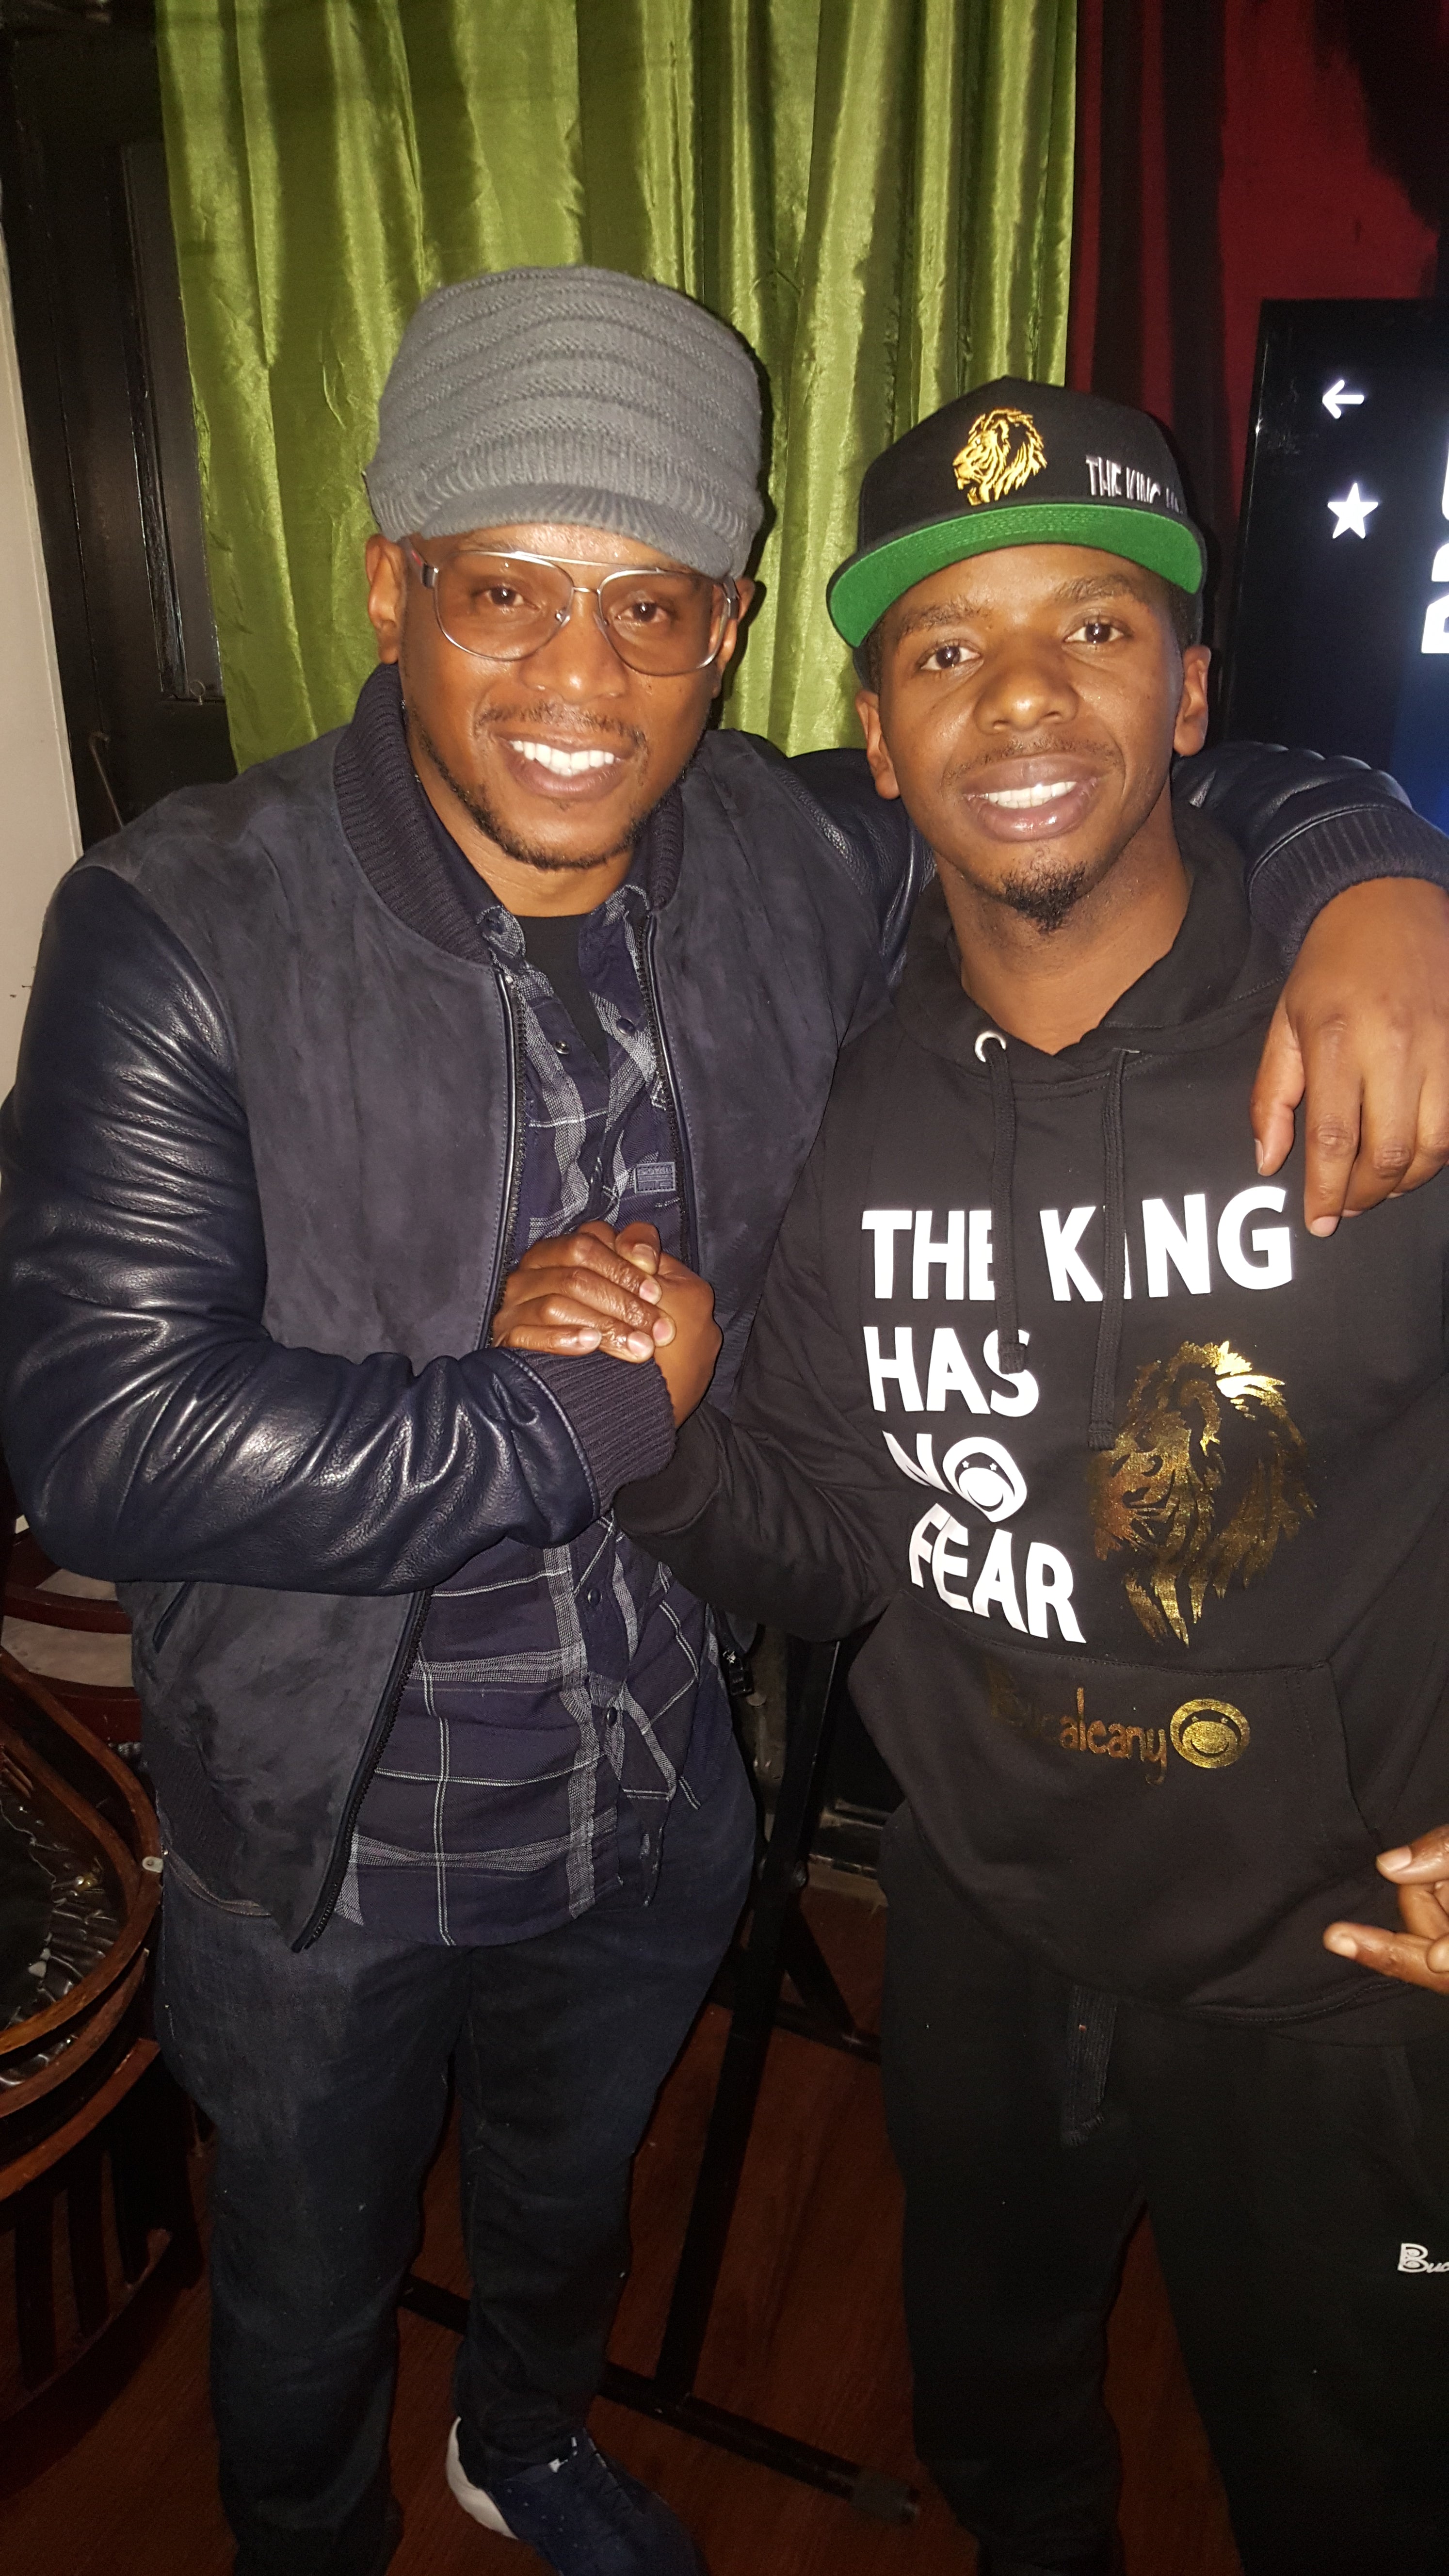 The Legend Sway Calloway has always been a great supporter of Bucaleany.